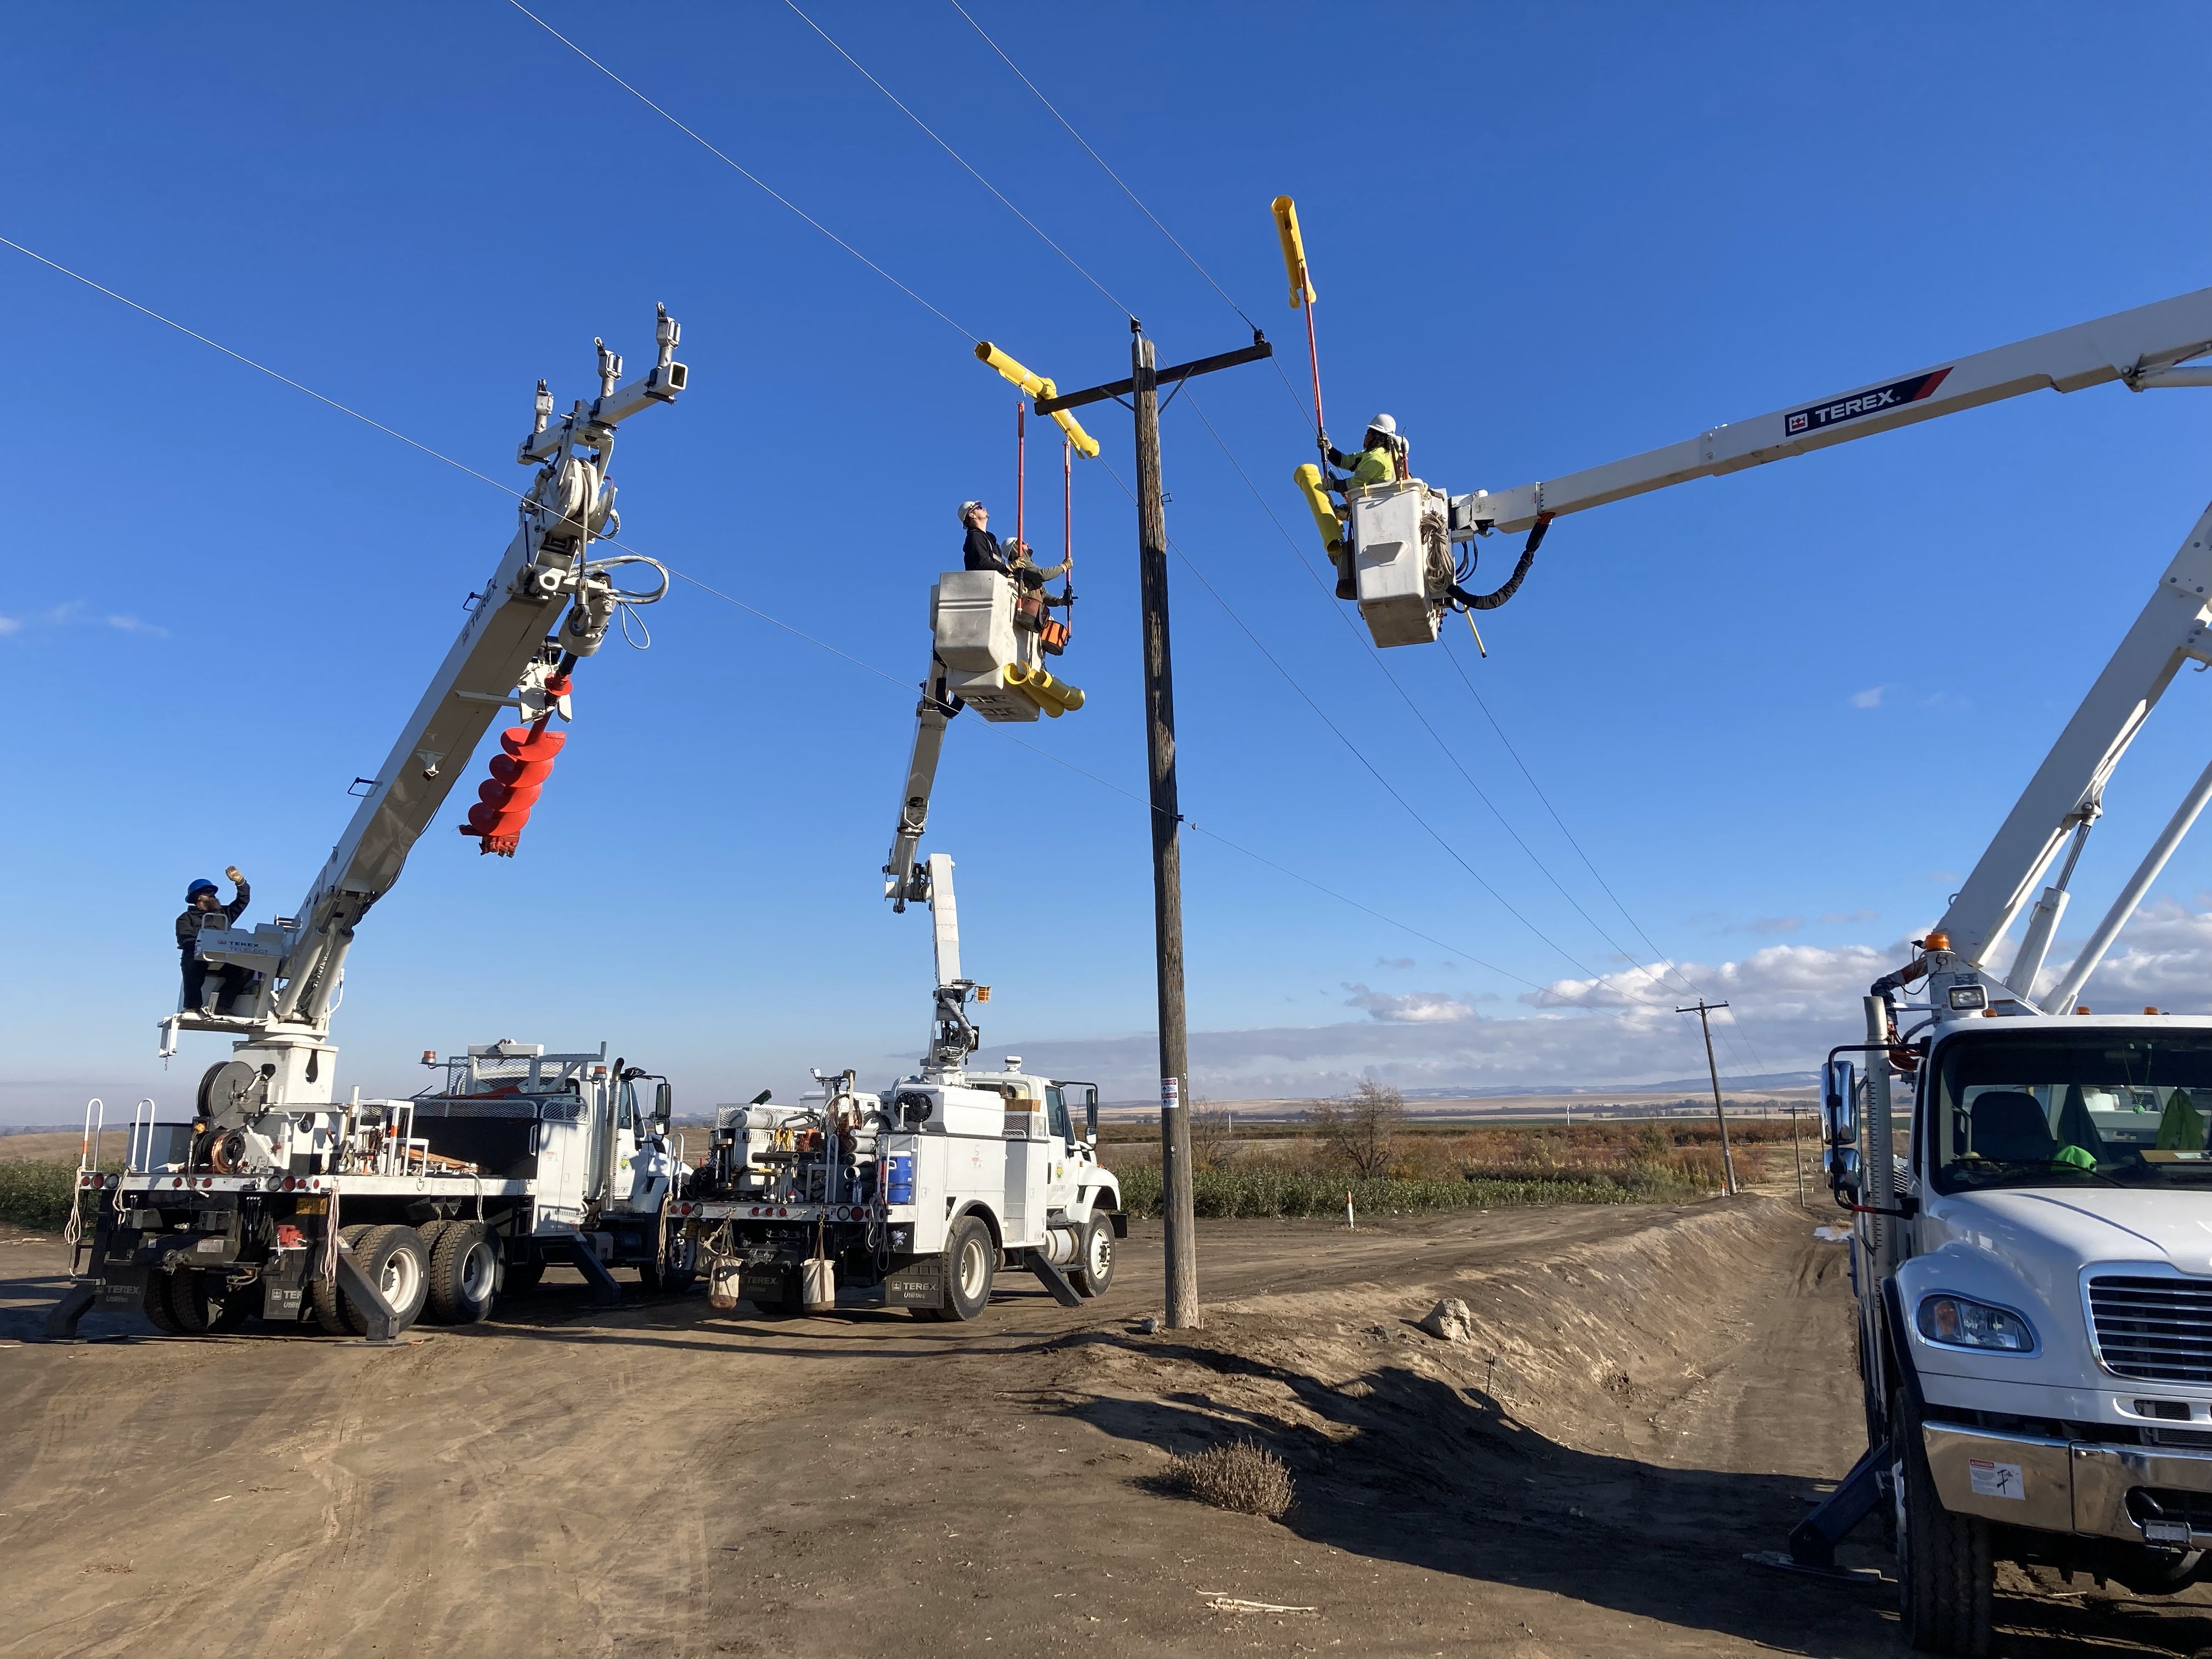 Line crew placing coverup over energized lines